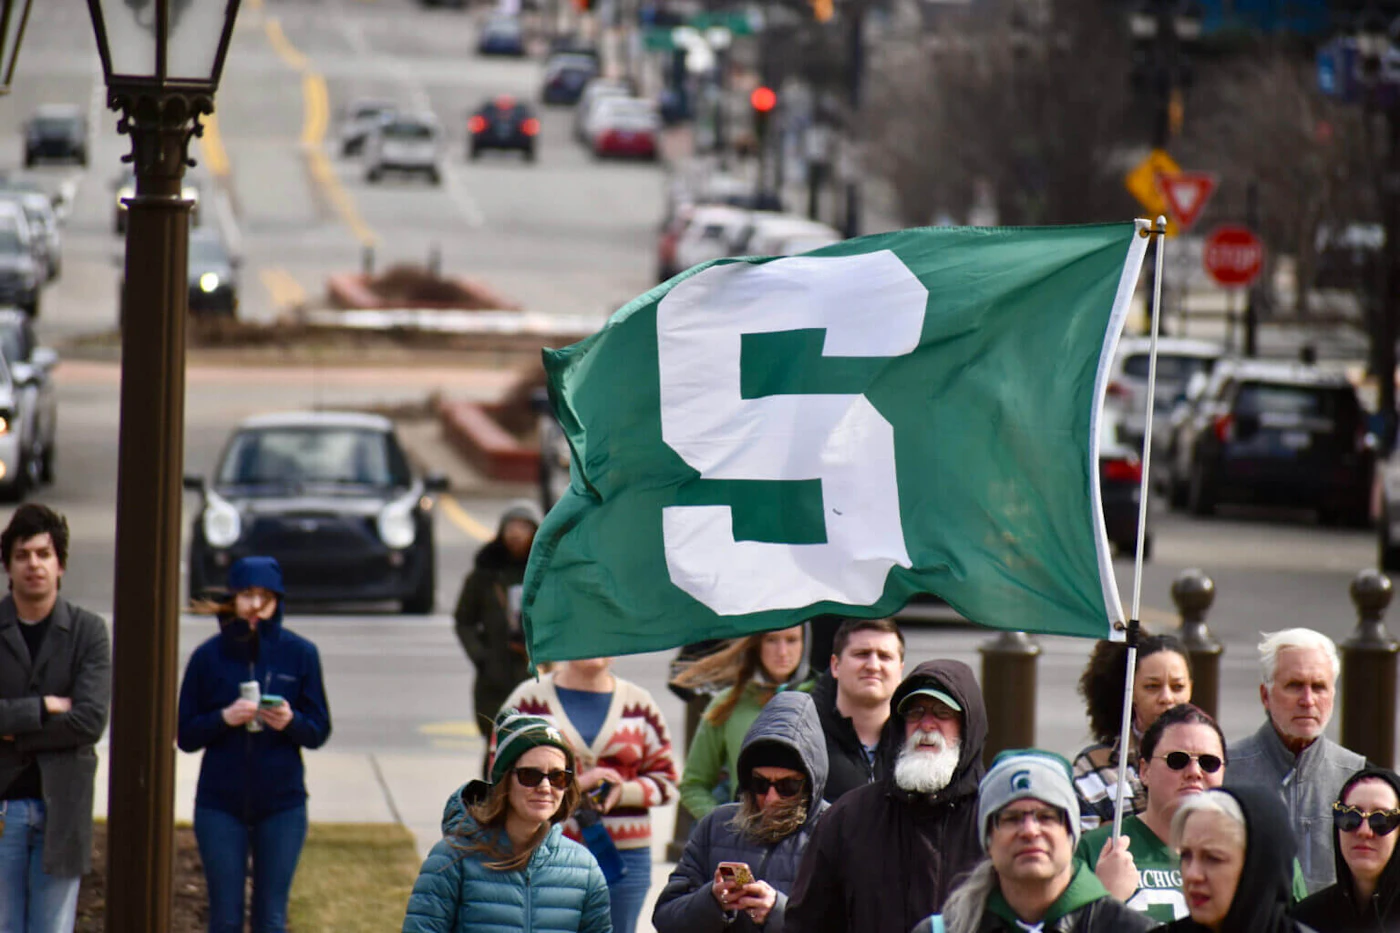 A Spartan flag flies during a gathering at the state Capitol following the Feb. 13, 2023 mass shooting at Michigan State University, Feb. 15, 2023. (Photo via Laina G. Stebbins, Michigan Advance)